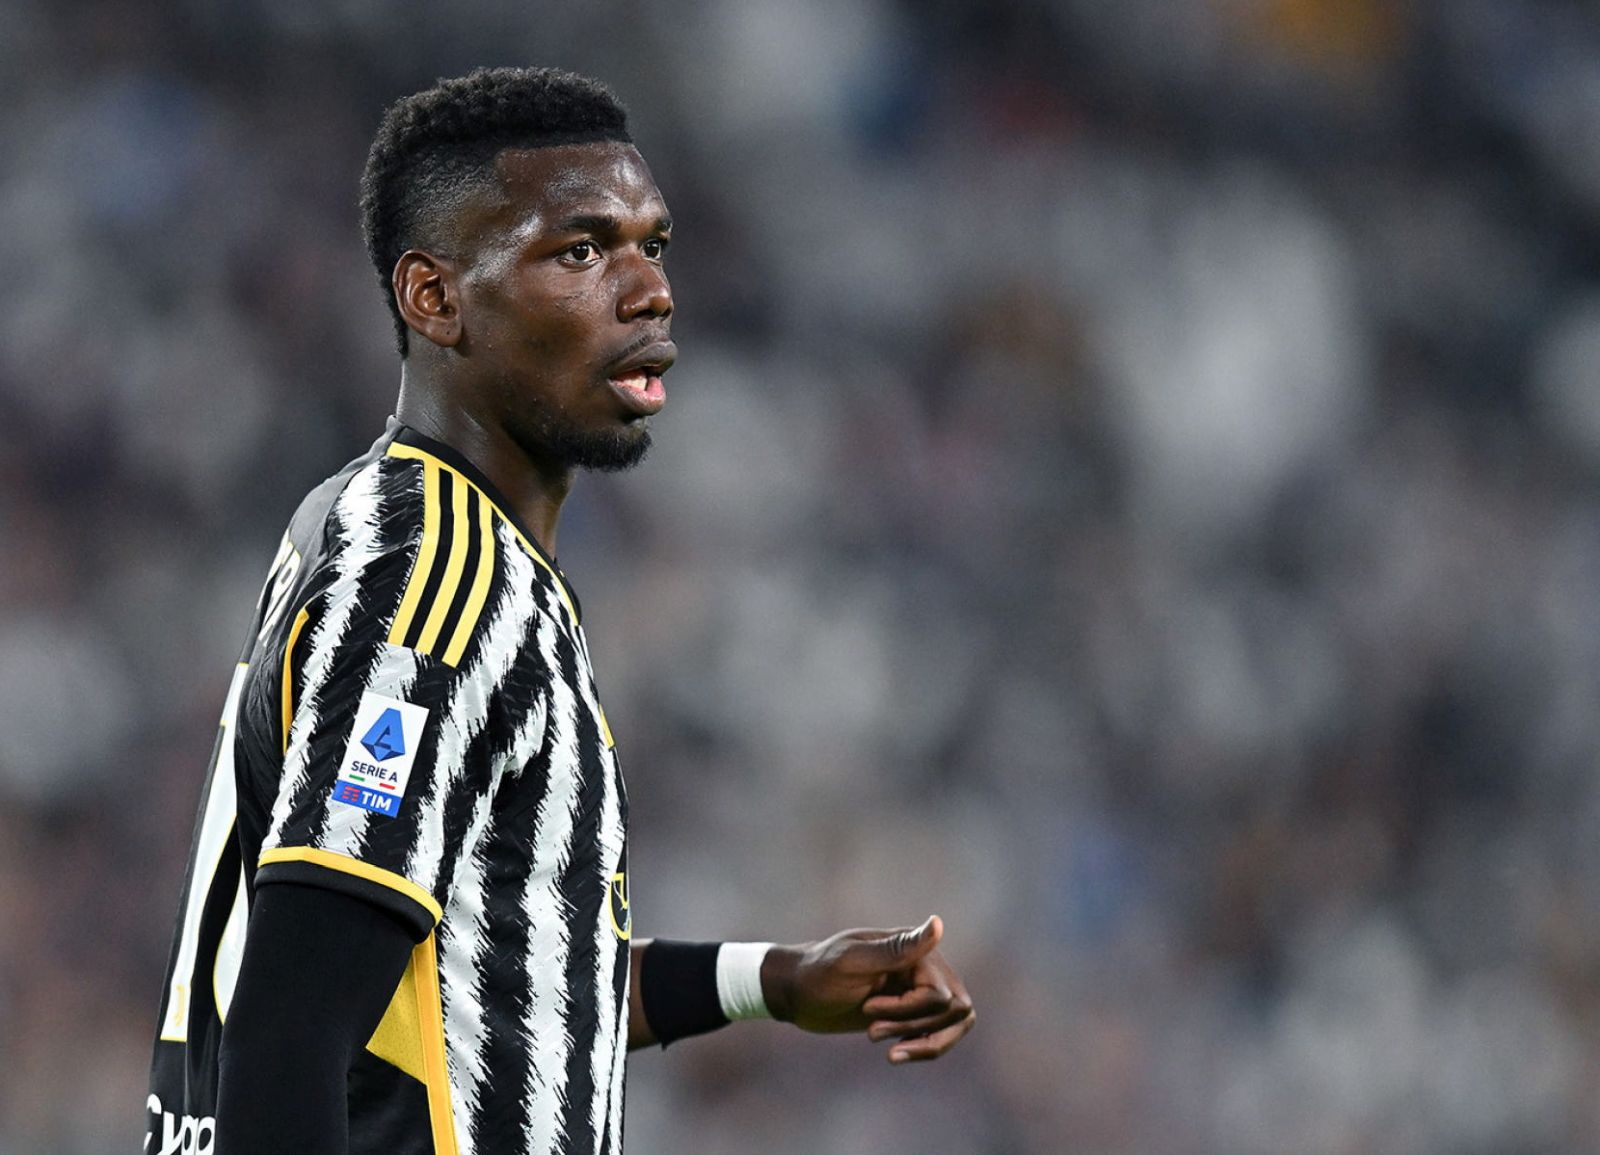 epa10855201 (FILE) A file photograph dated 14 May 2023 shows Juventus' Paul Pogba reacting during the Italian Serie A soccer match Juventus FC vs US Cremonese at the Allianz Stadium in Turin, Italy, re-issued 11 September 2023. Juventus released a statement on 11 September 2023, that Paul Pogba was provisionally suspended after testing positive for testosterone.  EPA/ALESSANDRO DI MARCO